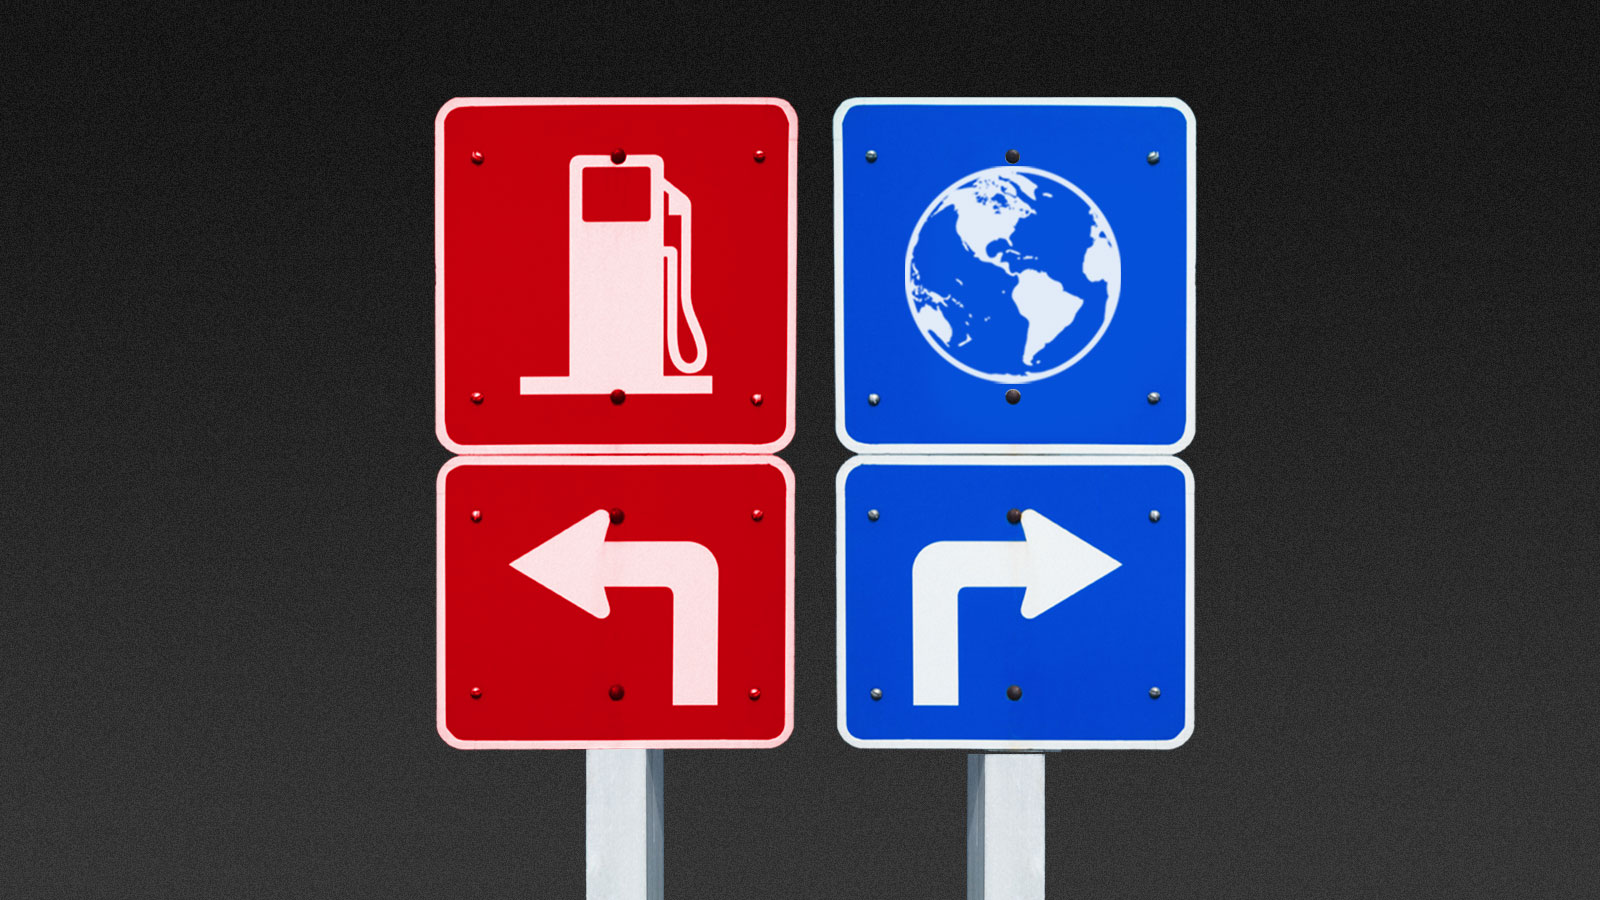 Red road sign with symbol for gasoline and an arrow pointing left next to blue road sign with symbol of Earth and arrow pointing right